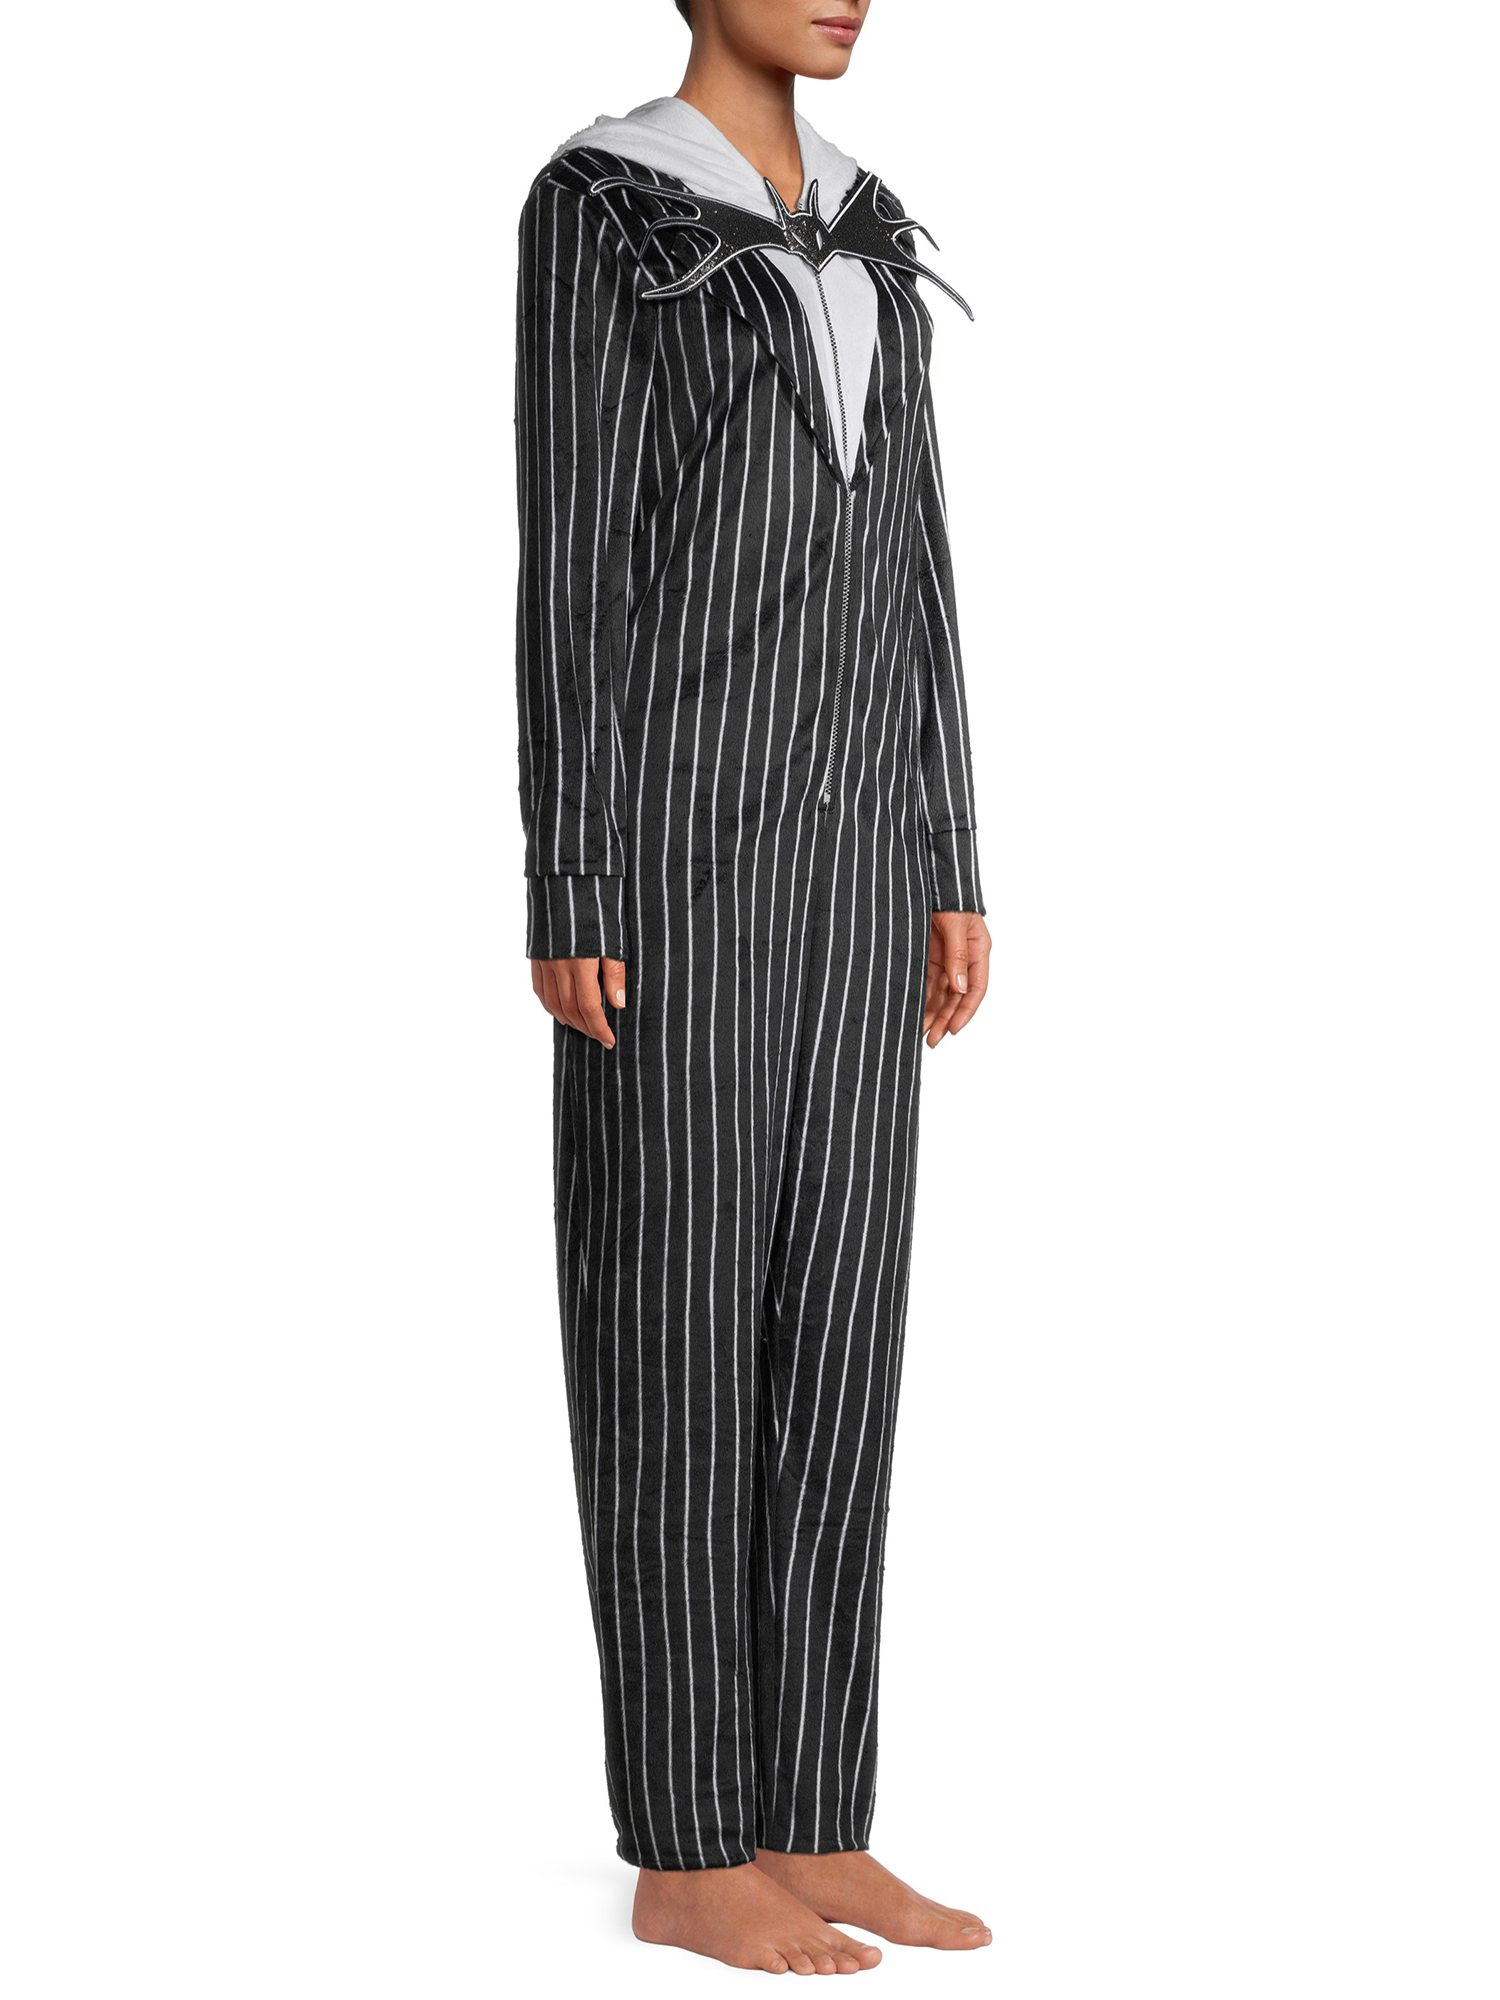 Disney Women's Nightmare Before Christmas Hooded Union Suit - image 4 of 6